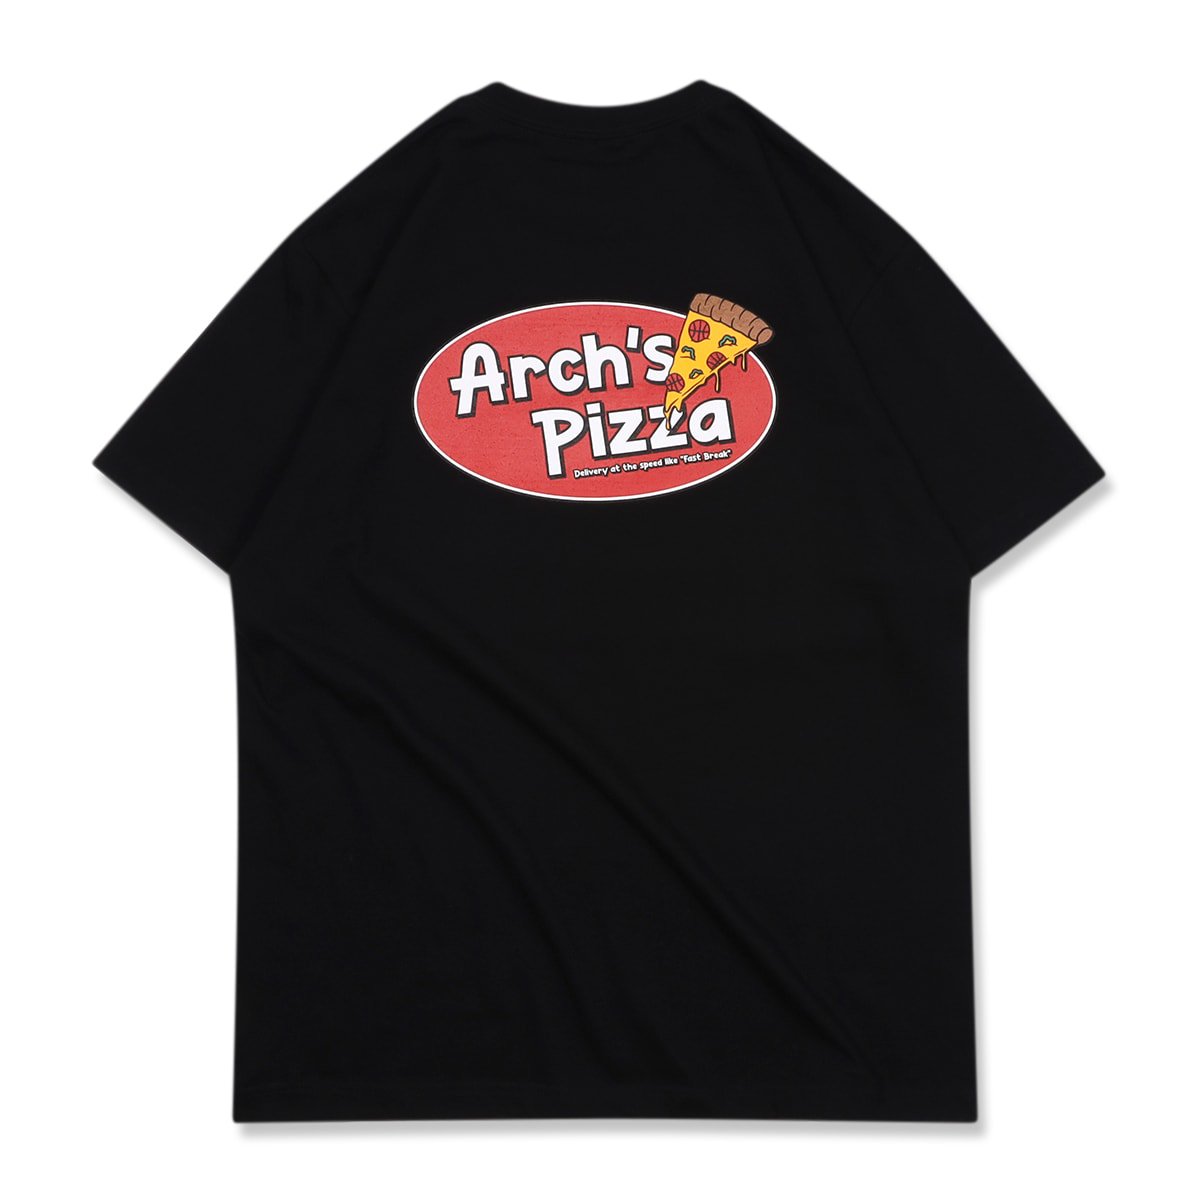 Arch's pizza tee【black】 - Arch ☆ アーチ [バスケットボール 